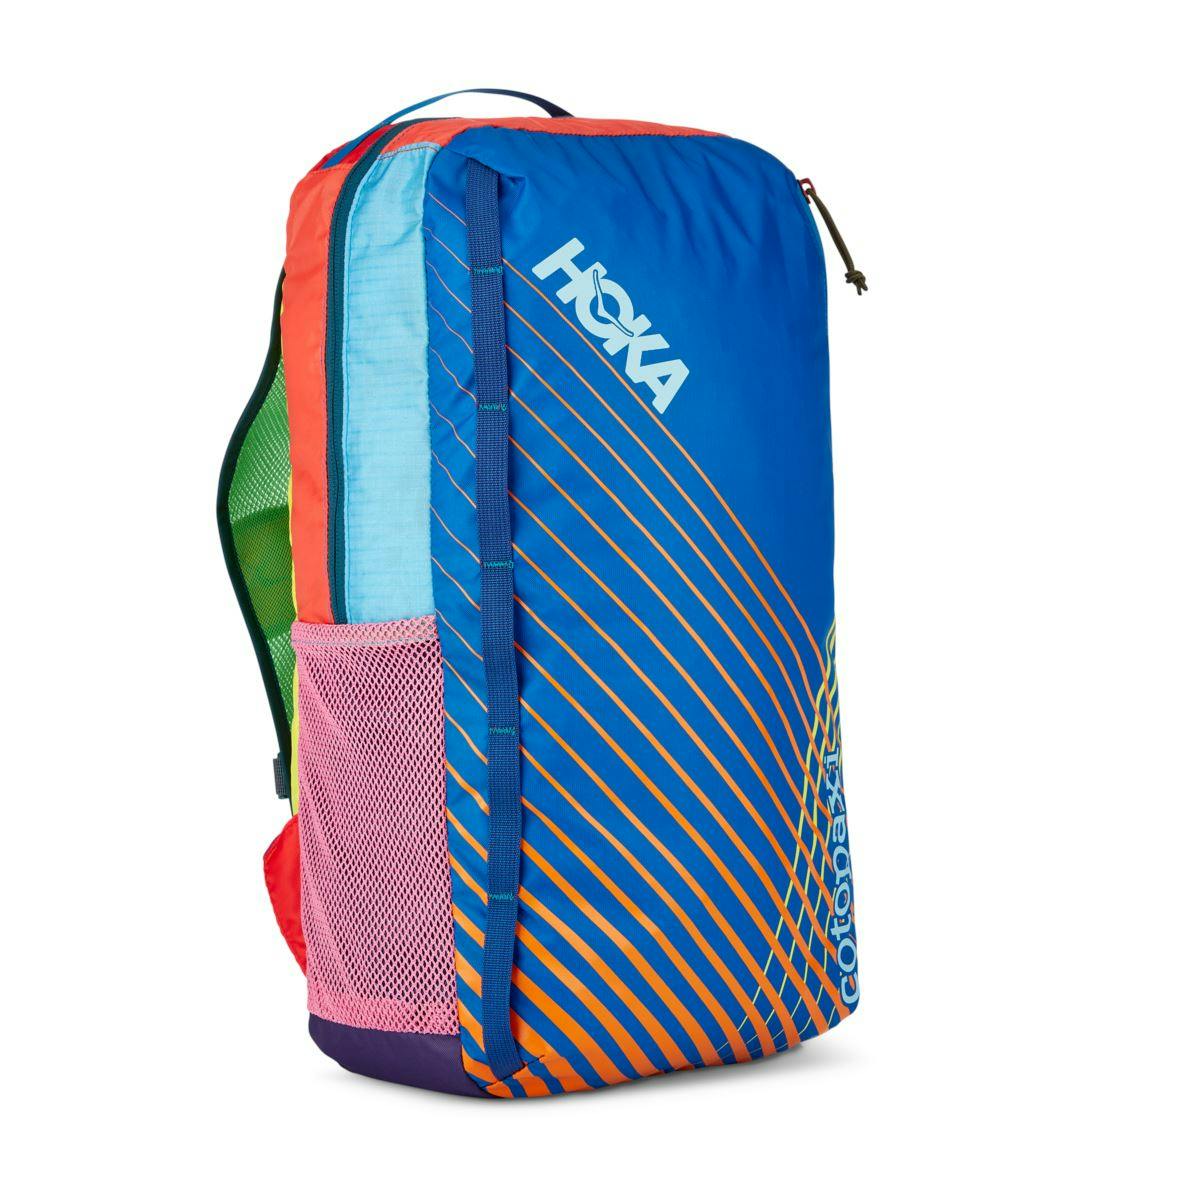 A product image of the Batac Dia X Hoka and Cotopaxi backpack.